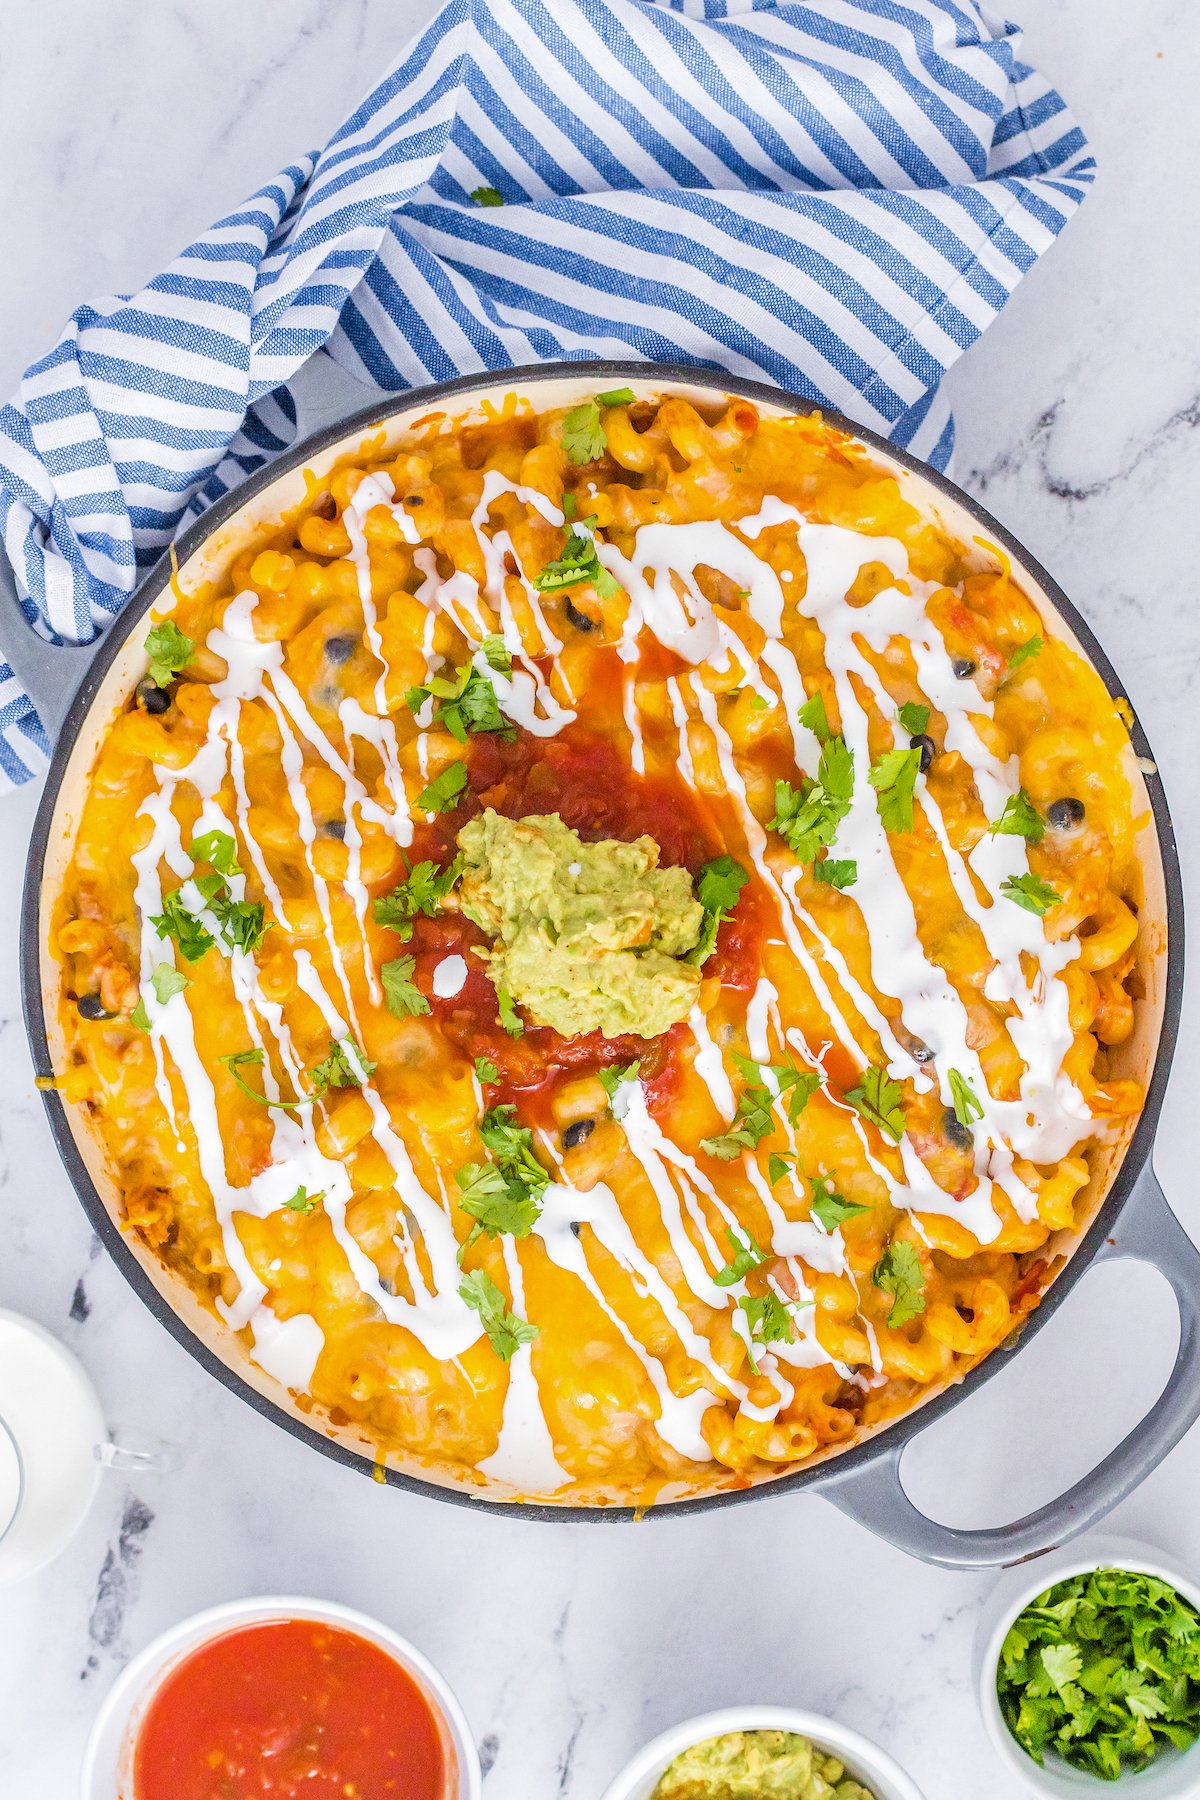 Overhead shot of a round baking dish filled with a cheesy casserole mixture topped with salsa and other toppings.